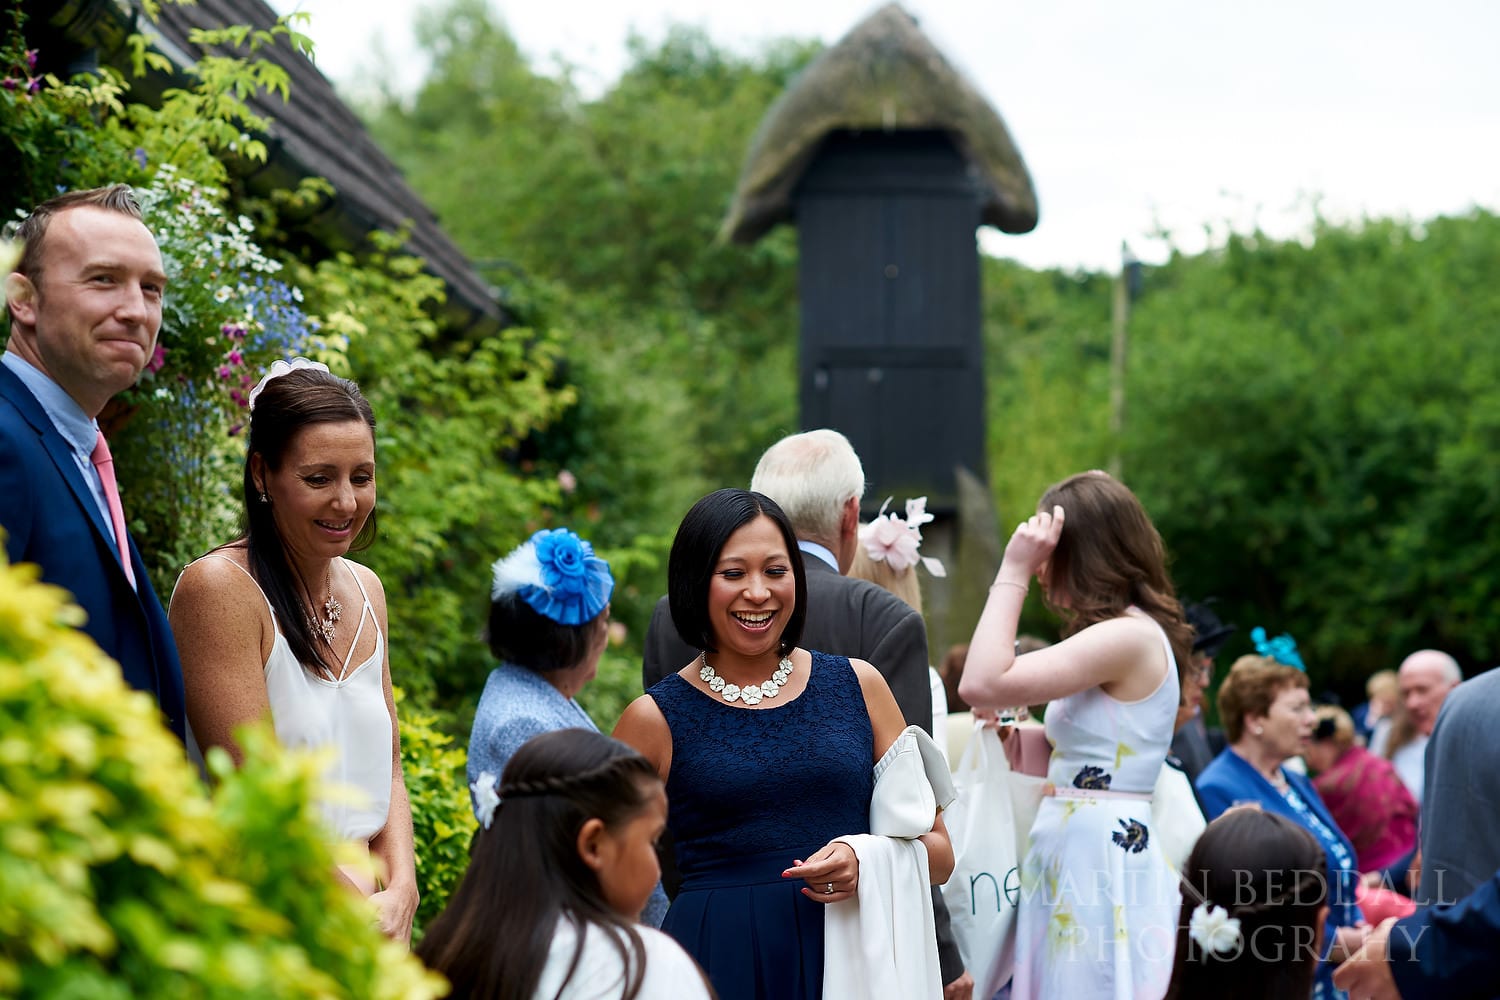 Guests gather for a Clock Barn wedding